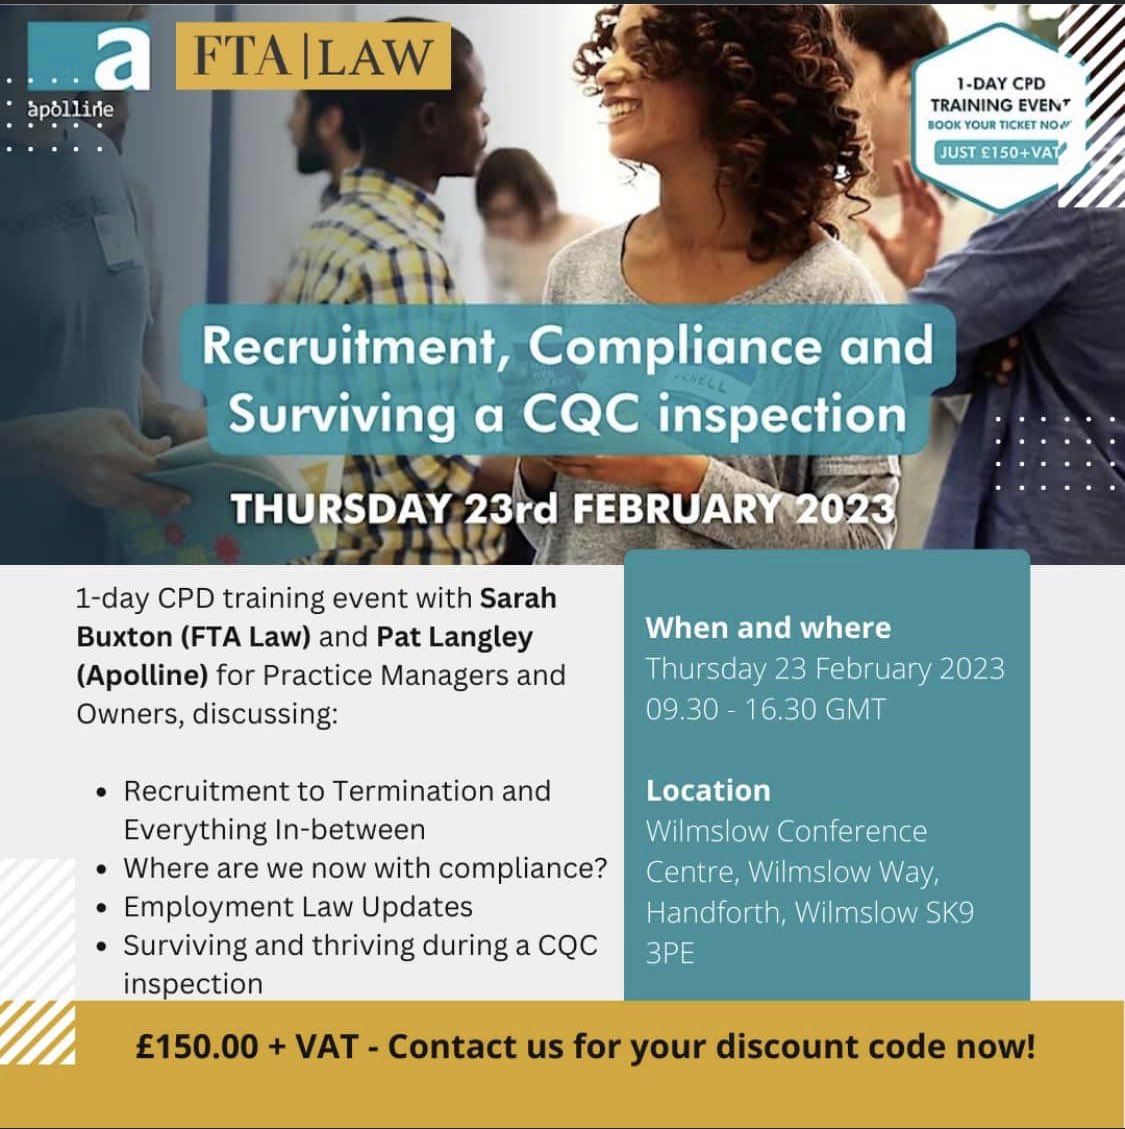 TWO WEEKS TO GO!!

Book your space now on our Compliance and HR event! The event is hosted by FTA Law and Apolline, and will cover Recruitment, Compliance and Surviving a CQC Inspection!

#Apolline #dentalcompliance #ftalaw #dentalspecialists #cqcinspection #dentallawyers